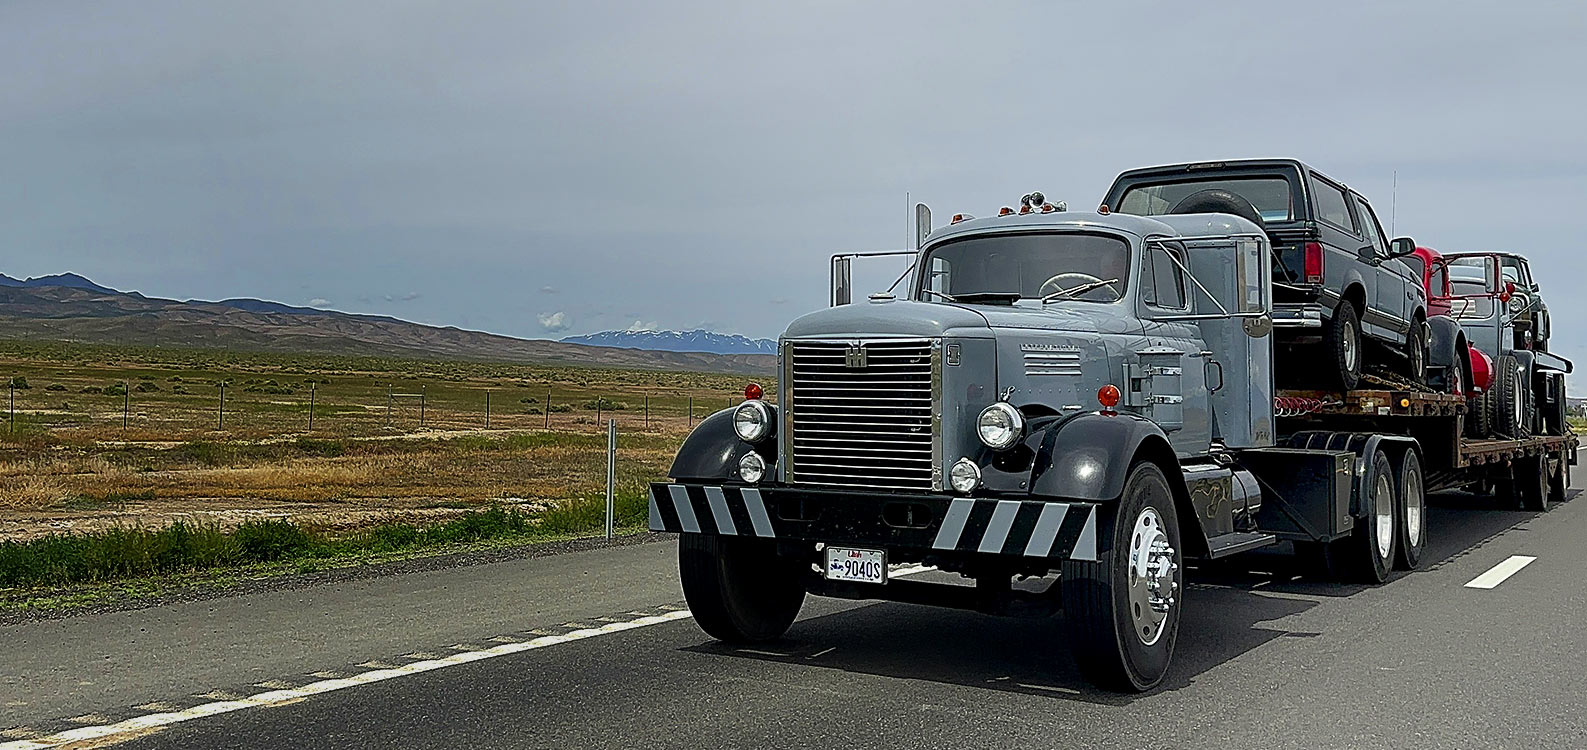 Join the American Truck Historical Society